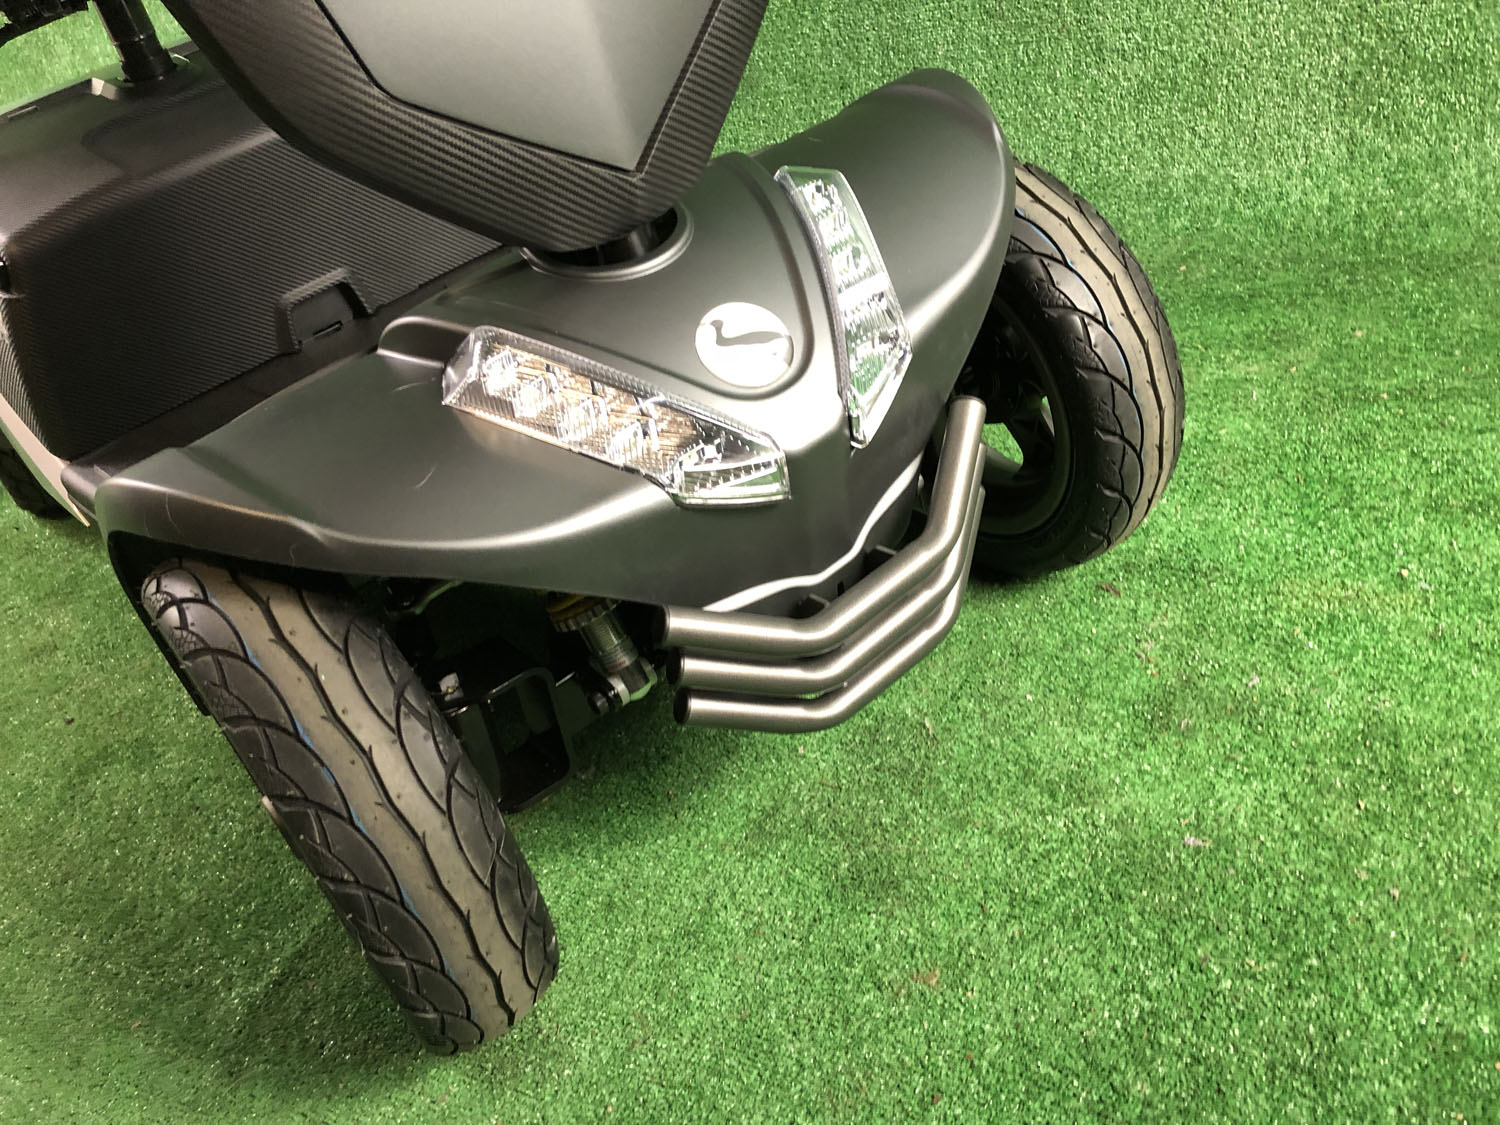 New Rascal Vecta Sport from Electric Mobility 8mph Mid Size Mobility Scooter